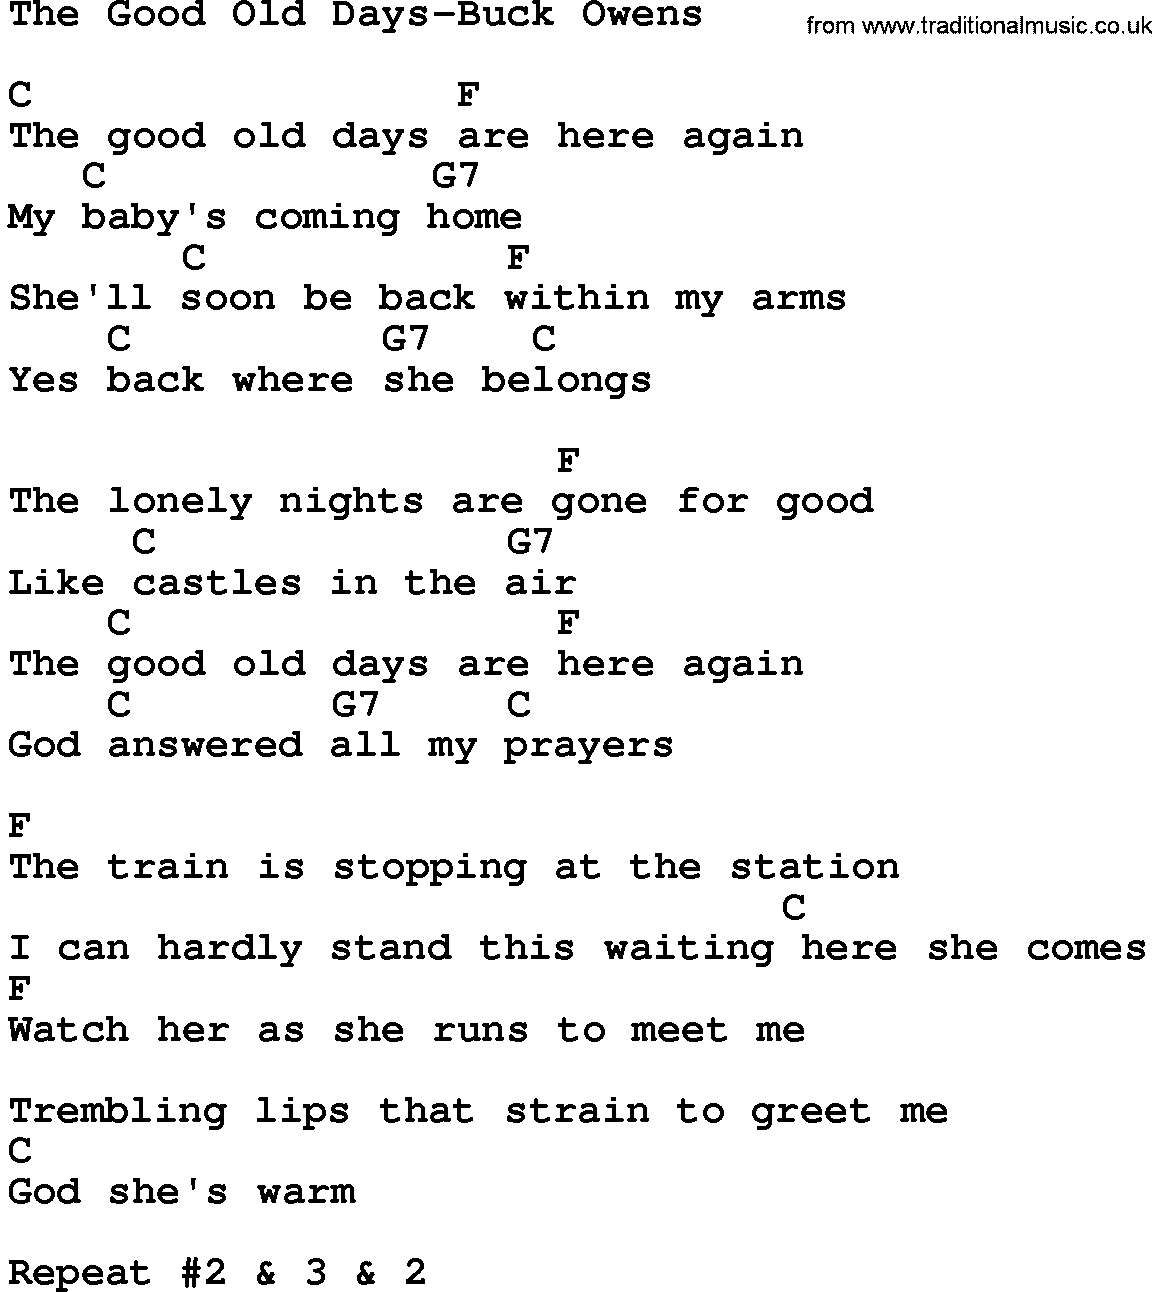 Country music song: The Good Old Days-Buck Owens lyrics and chords